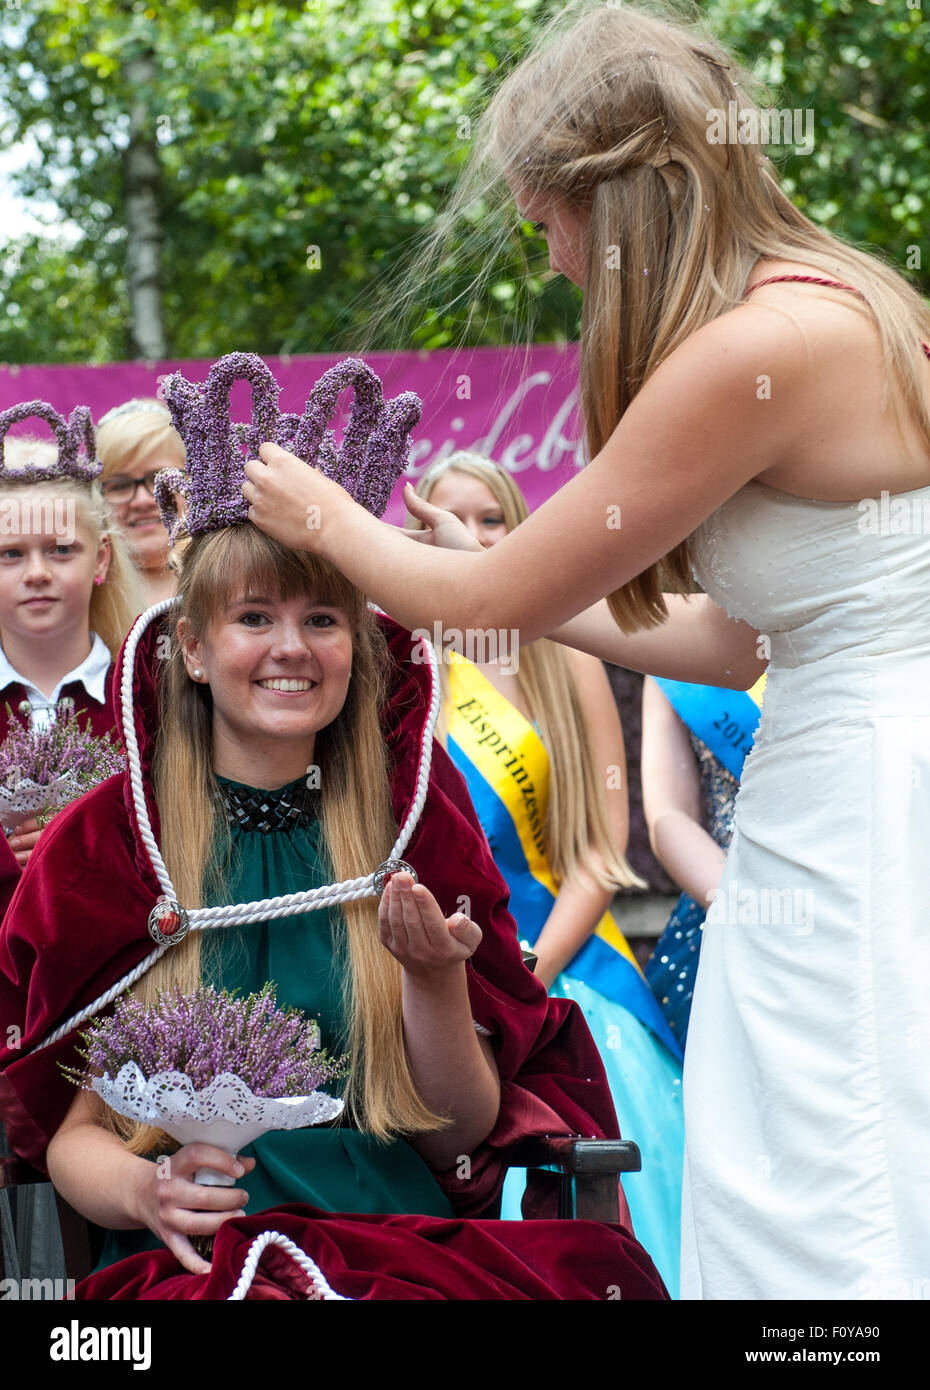 Amelinghausen, Germany. 23rd Aug, 2015. 22-year-old Victoria Glaser (L) is crowned by her predecessor Sophia Wischmann (R) after being elected the new Heather Queen in Amelinghausen, Germany, 23 August 2015. The annual Heather Blossom Festival culminates in the election of the Heather Queen. After the coronation, a precession featuring festively decorated floats, music bands and other groups is held in the town. The new Heather Queen will now represent the region across Germany for a year. PHoto: PHILIPP SCHULZE/dpa/Alamy Live News Stock Photo